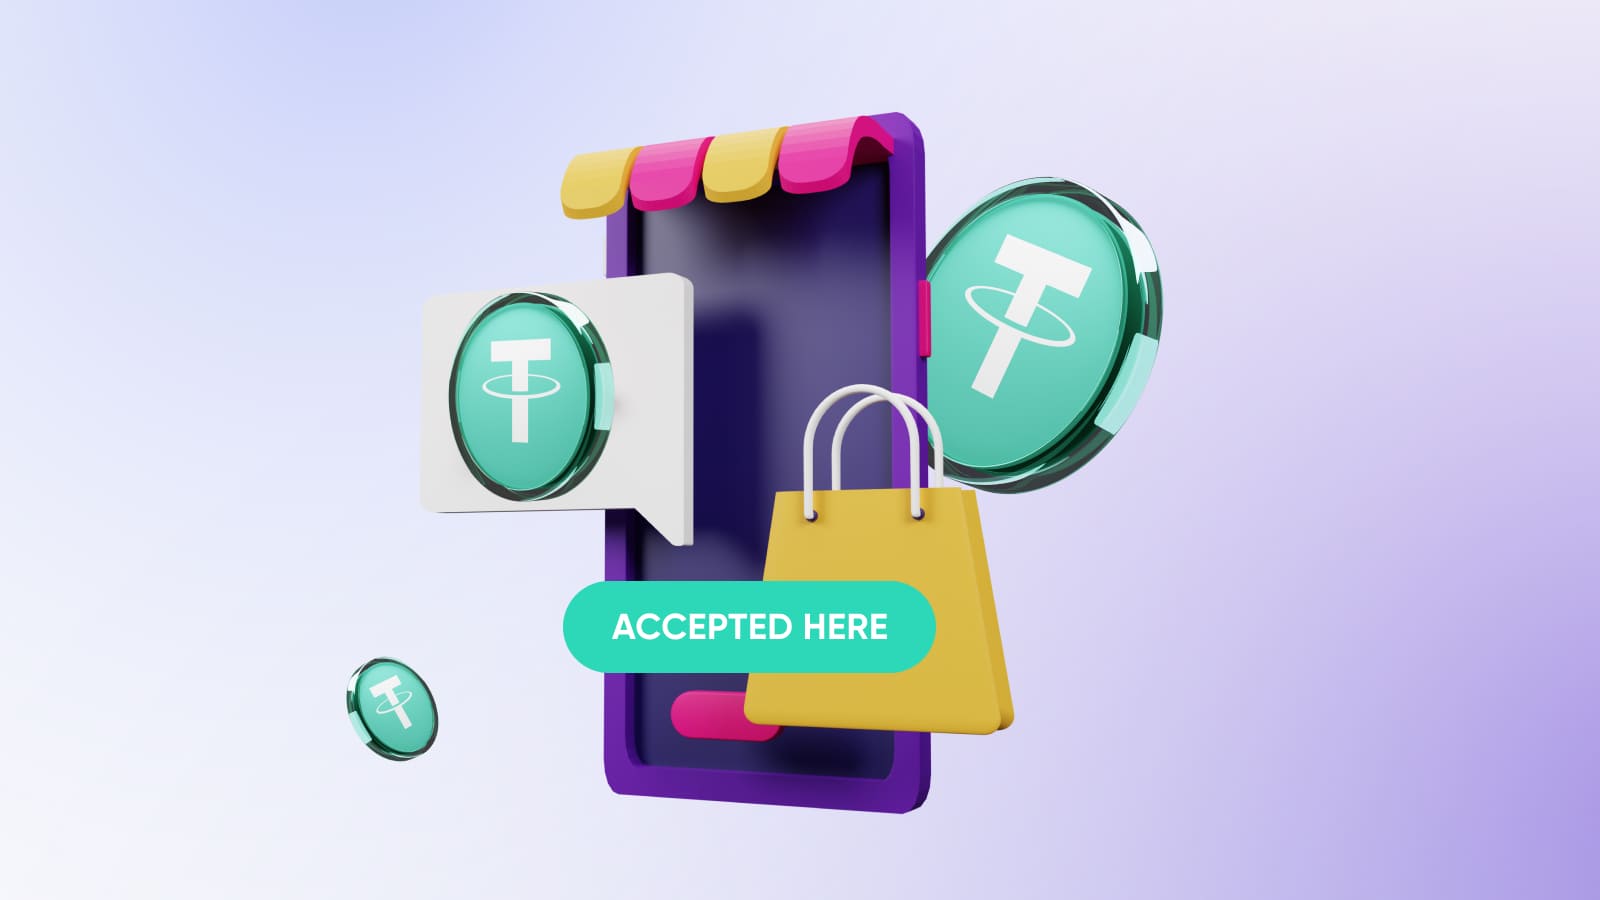 One of the main advantages of using crypto acquiring to accept payments is that there are no restrictions.